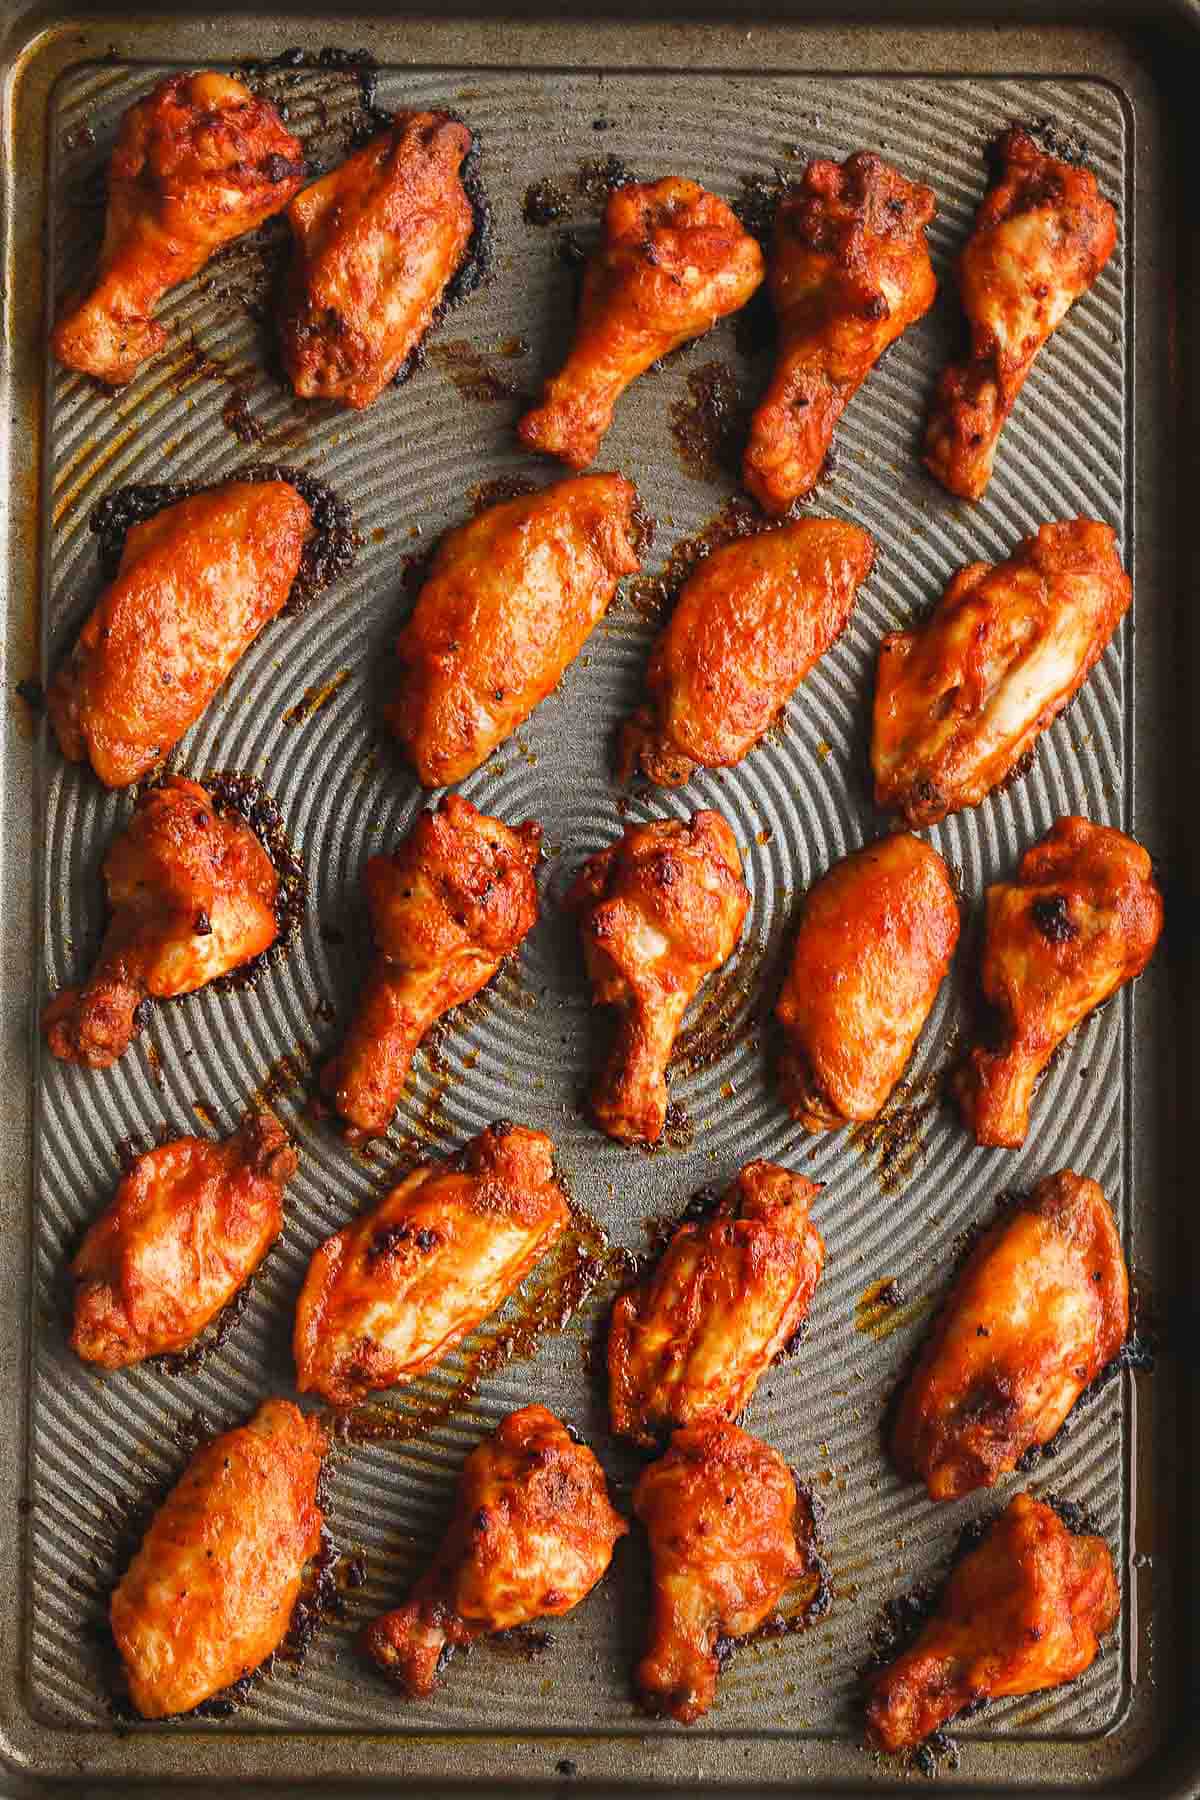 Crispy and perfectly cooked chicken wings on a sheet pan